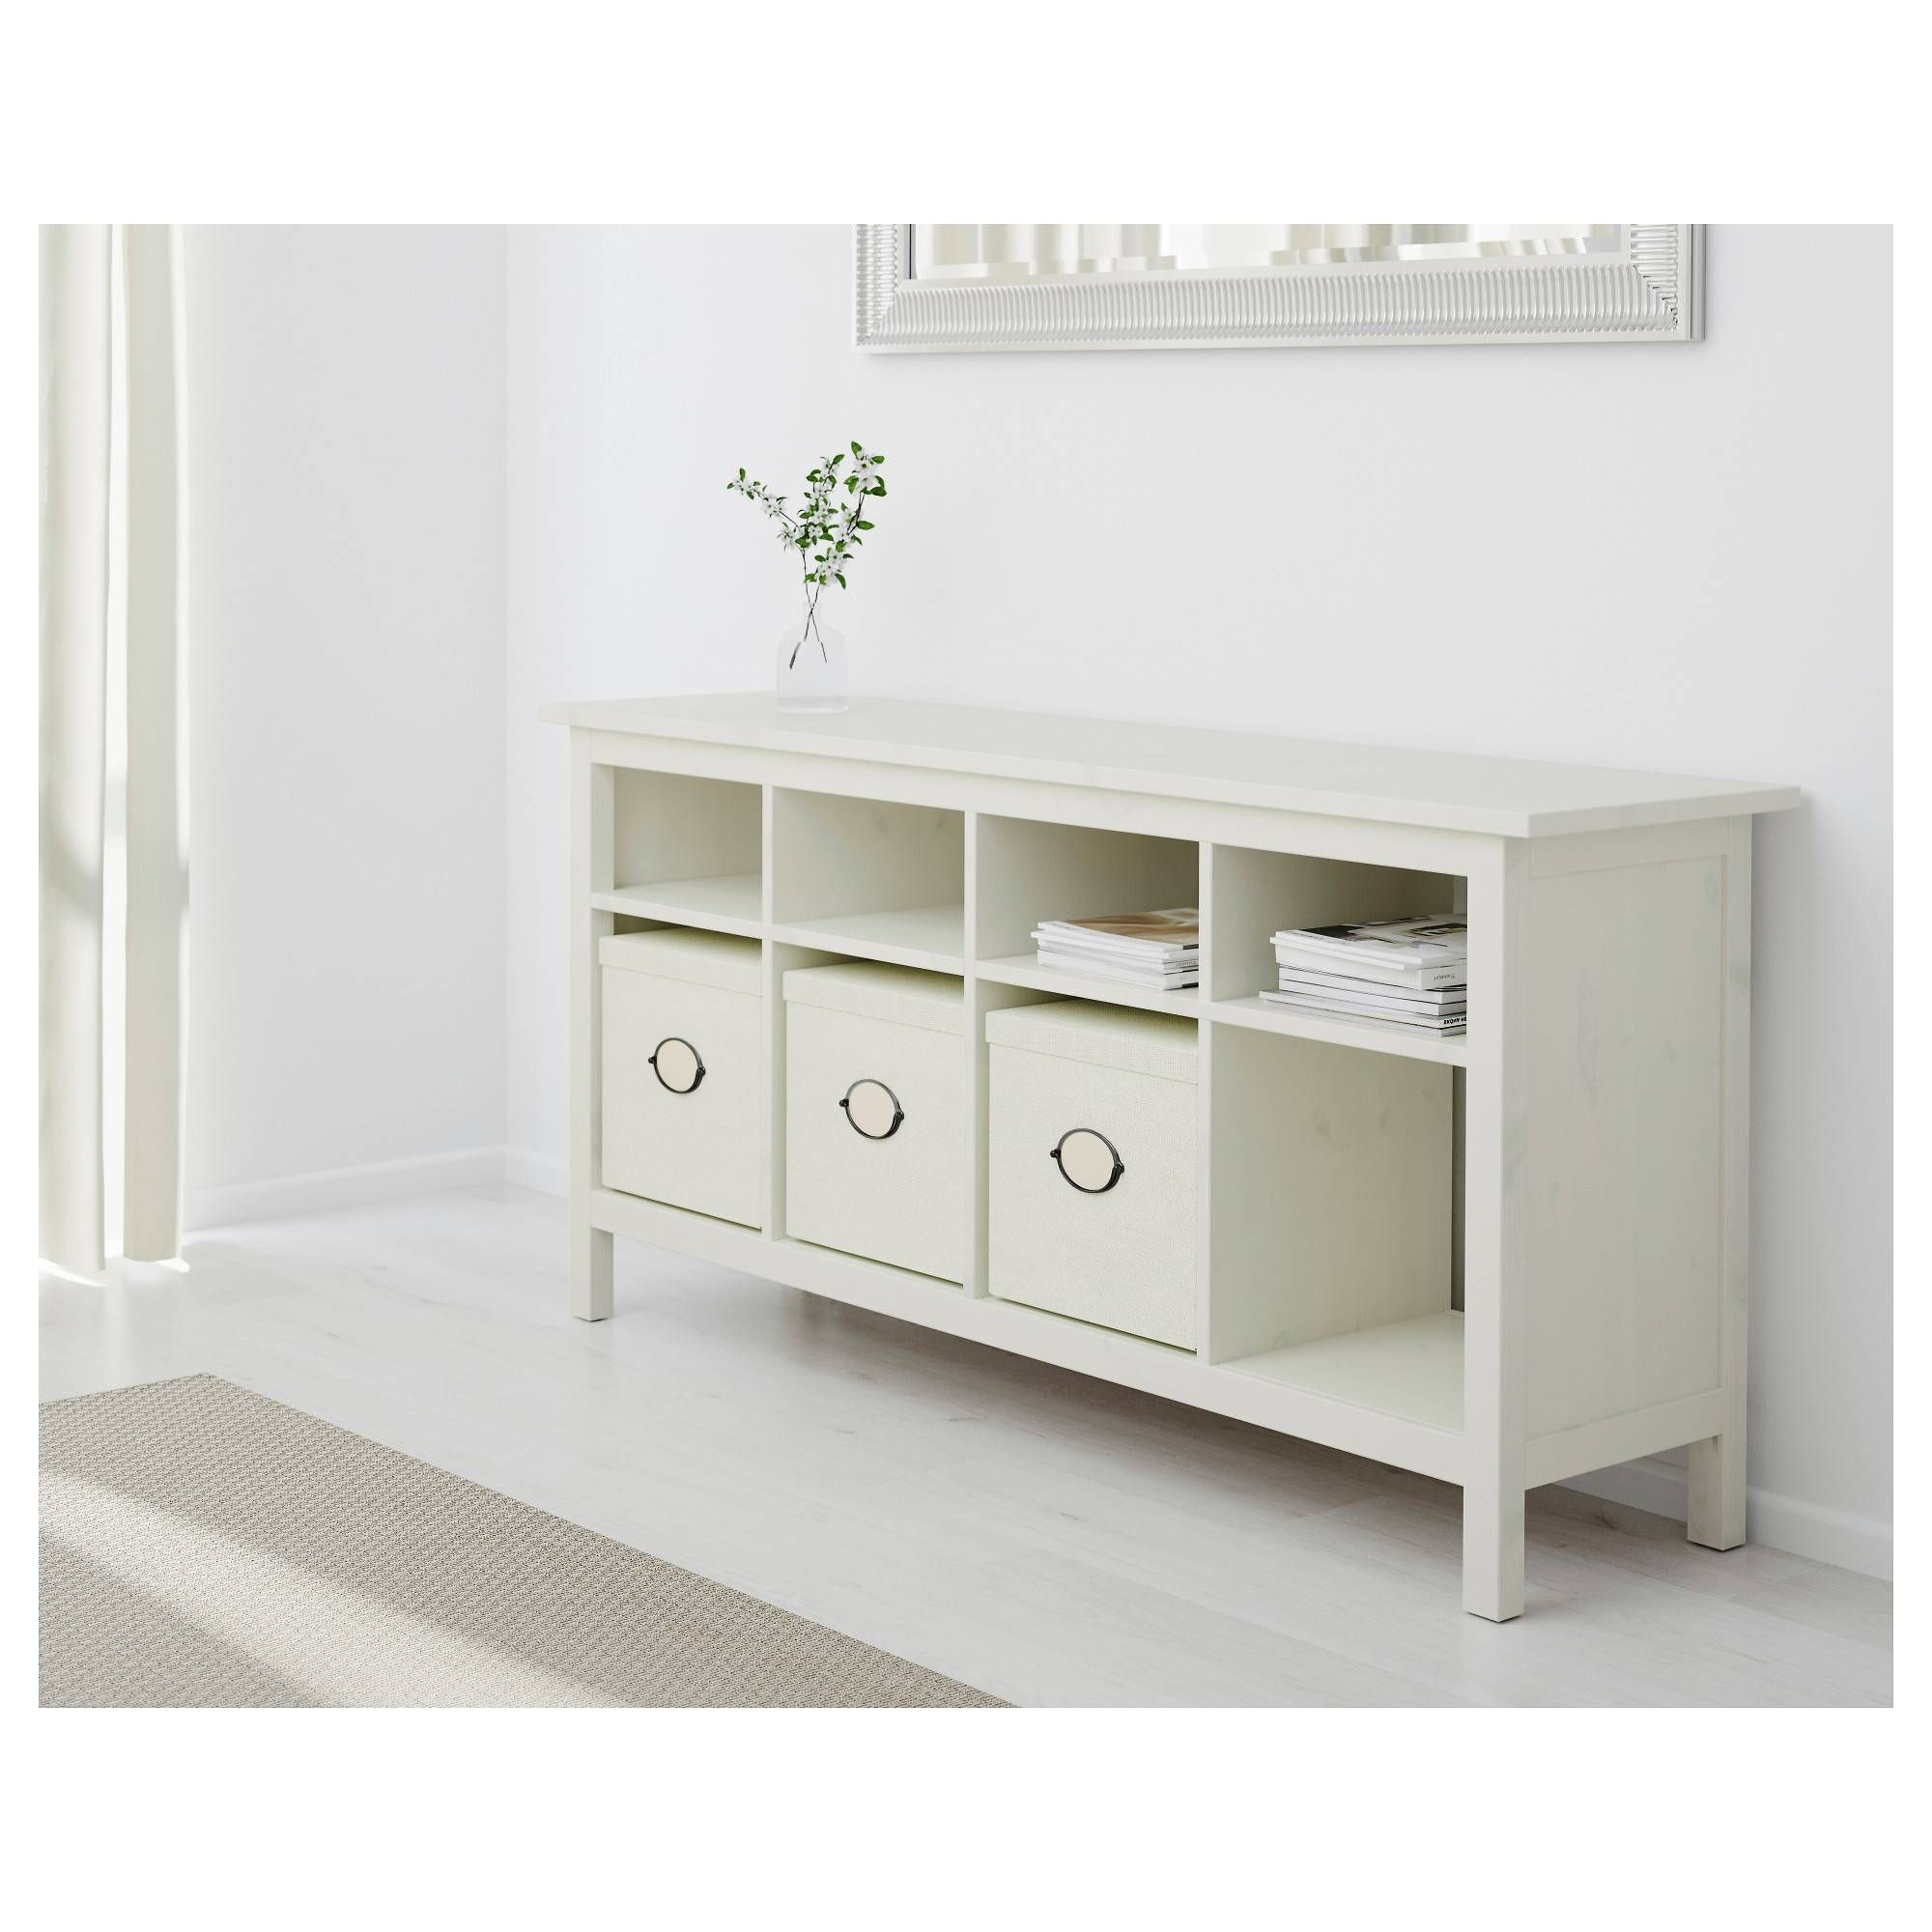 Hemnes Console Table – White Stain – Ikea In Recent Hemnes Sideboards (View 9 of 15)